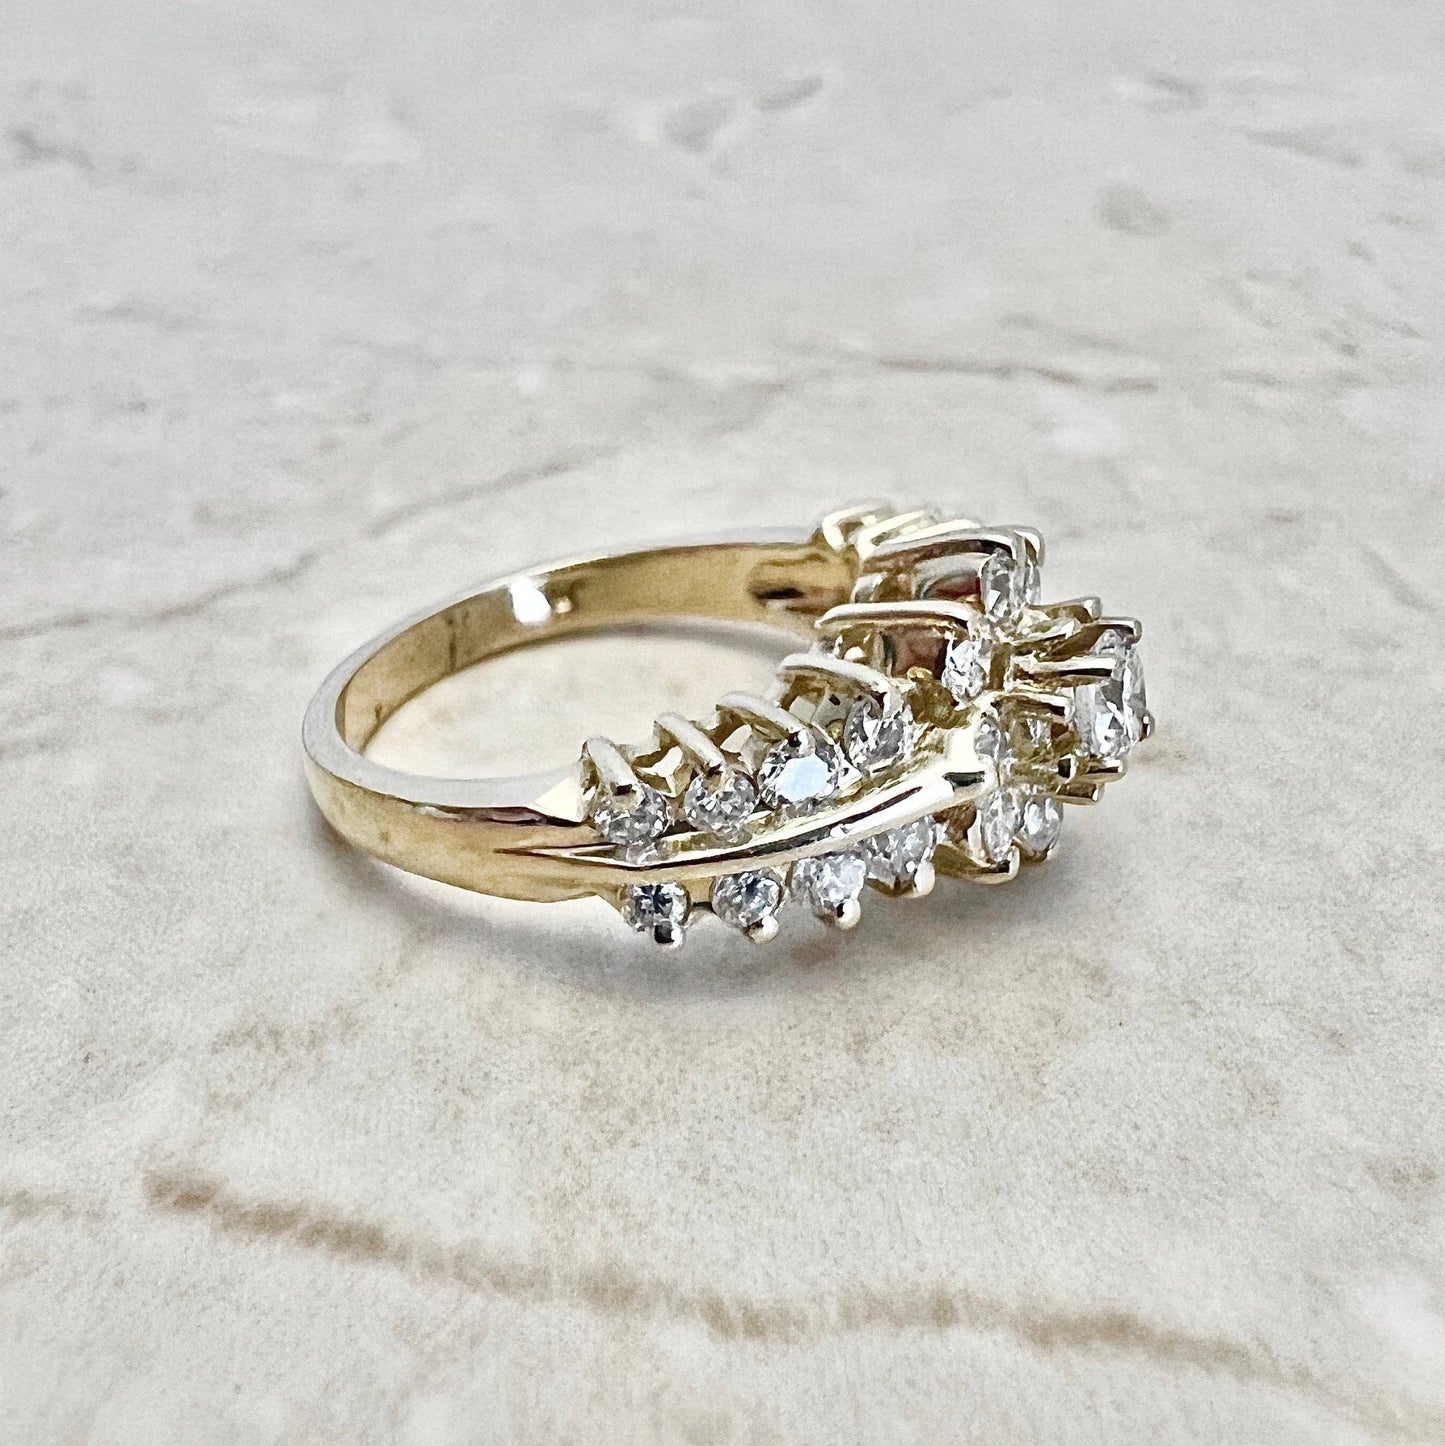 Fine 14K Diamond Halo Ring 1.05 CTTW - Yellow Gold - Diamond Cocktail Ring - Engagement Ring - Size 6.25 US - Best Birthday Gift For Her